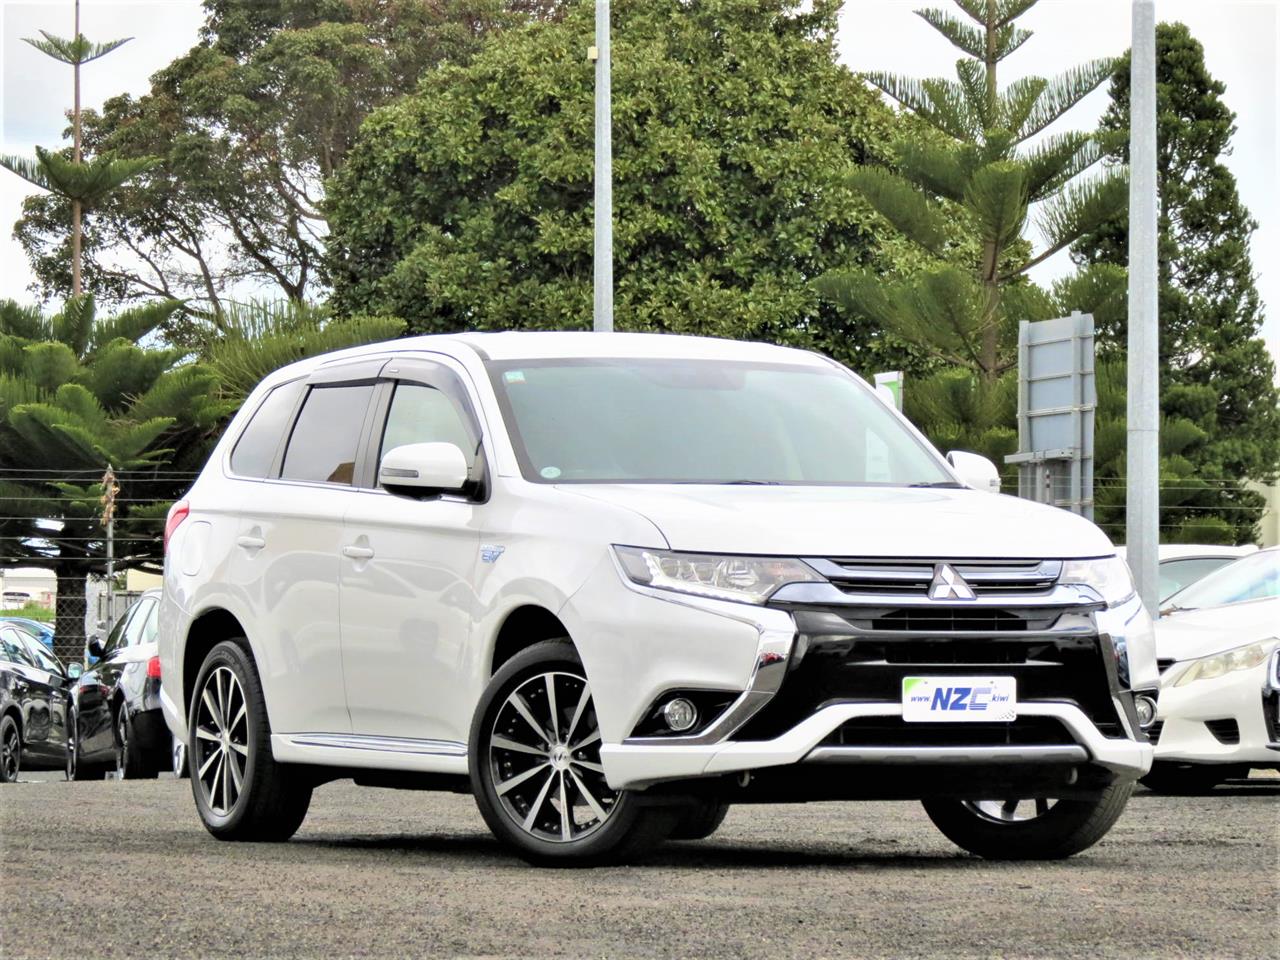 NZC best hot price for 2016 Mitsubishi Outlander in Auckland